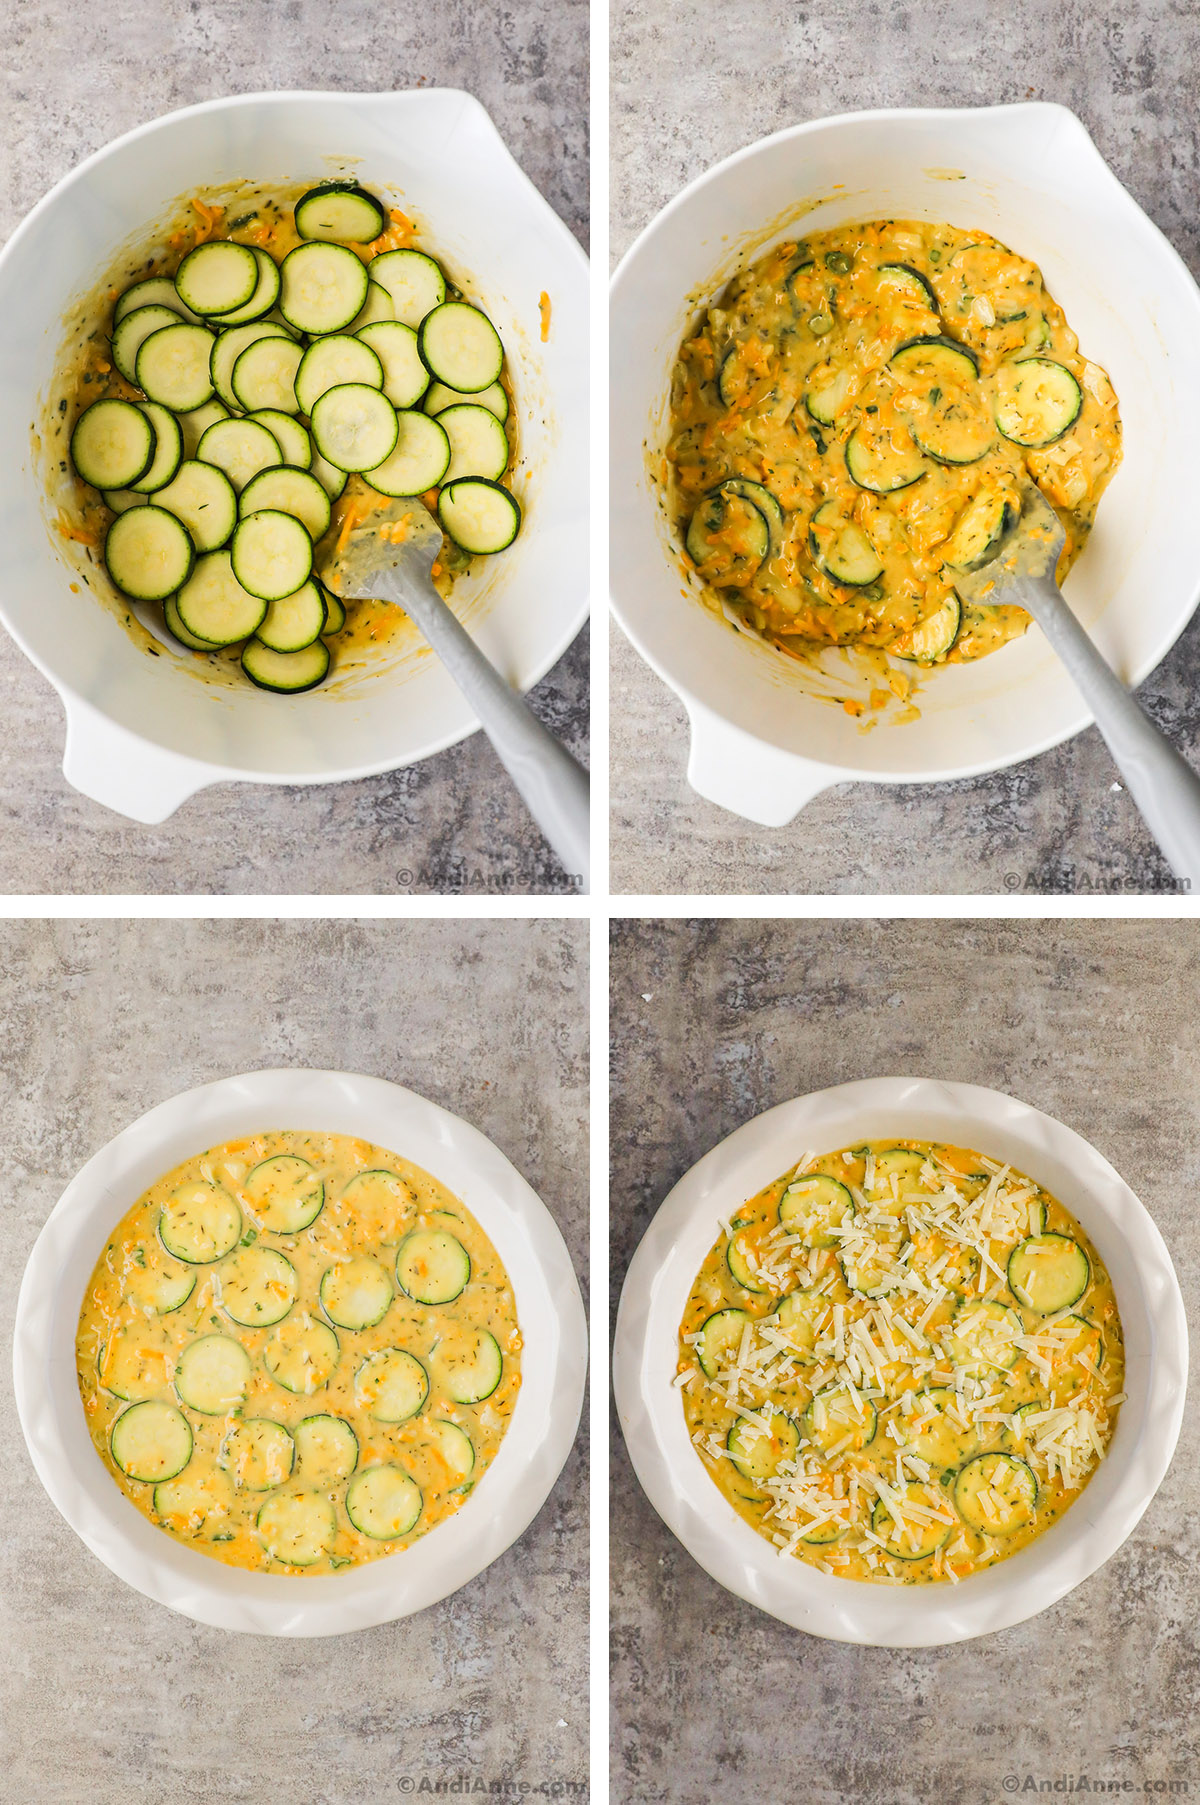 Four images, first is sliced zucchini on top of batter. Second is zucchini dumped into batter and mixed. Third is zucchini batter poured into pie dish. Fourth is shredded parmesan sprinkled over top of pie dish.